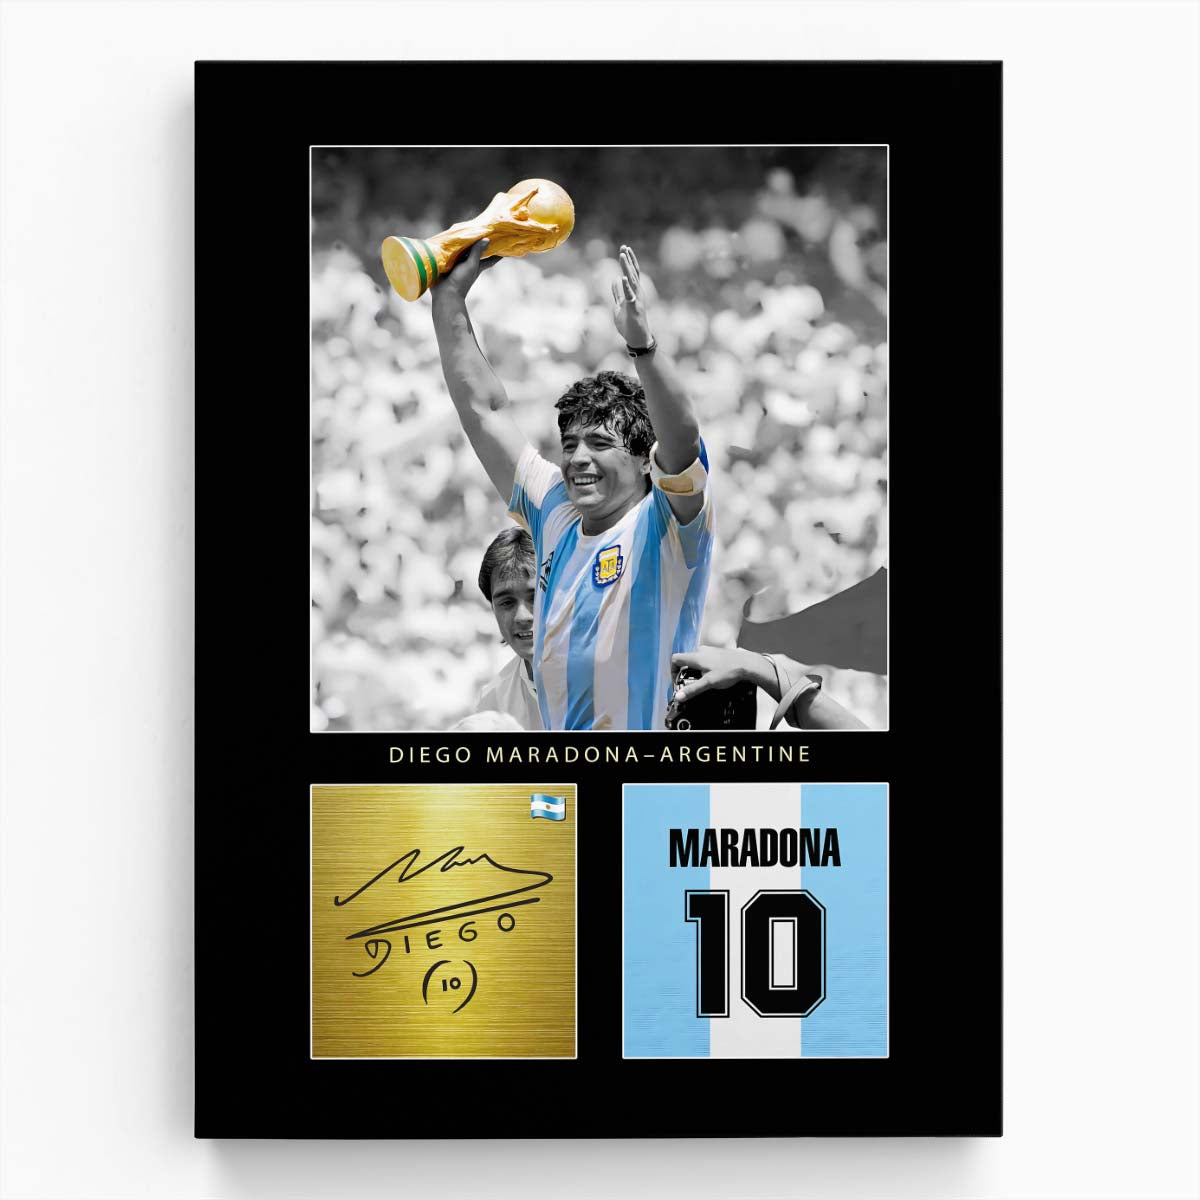 Diego Maradona Argentine Signature World Cup Wall Art by Luxuriance Designs. Made in USA.